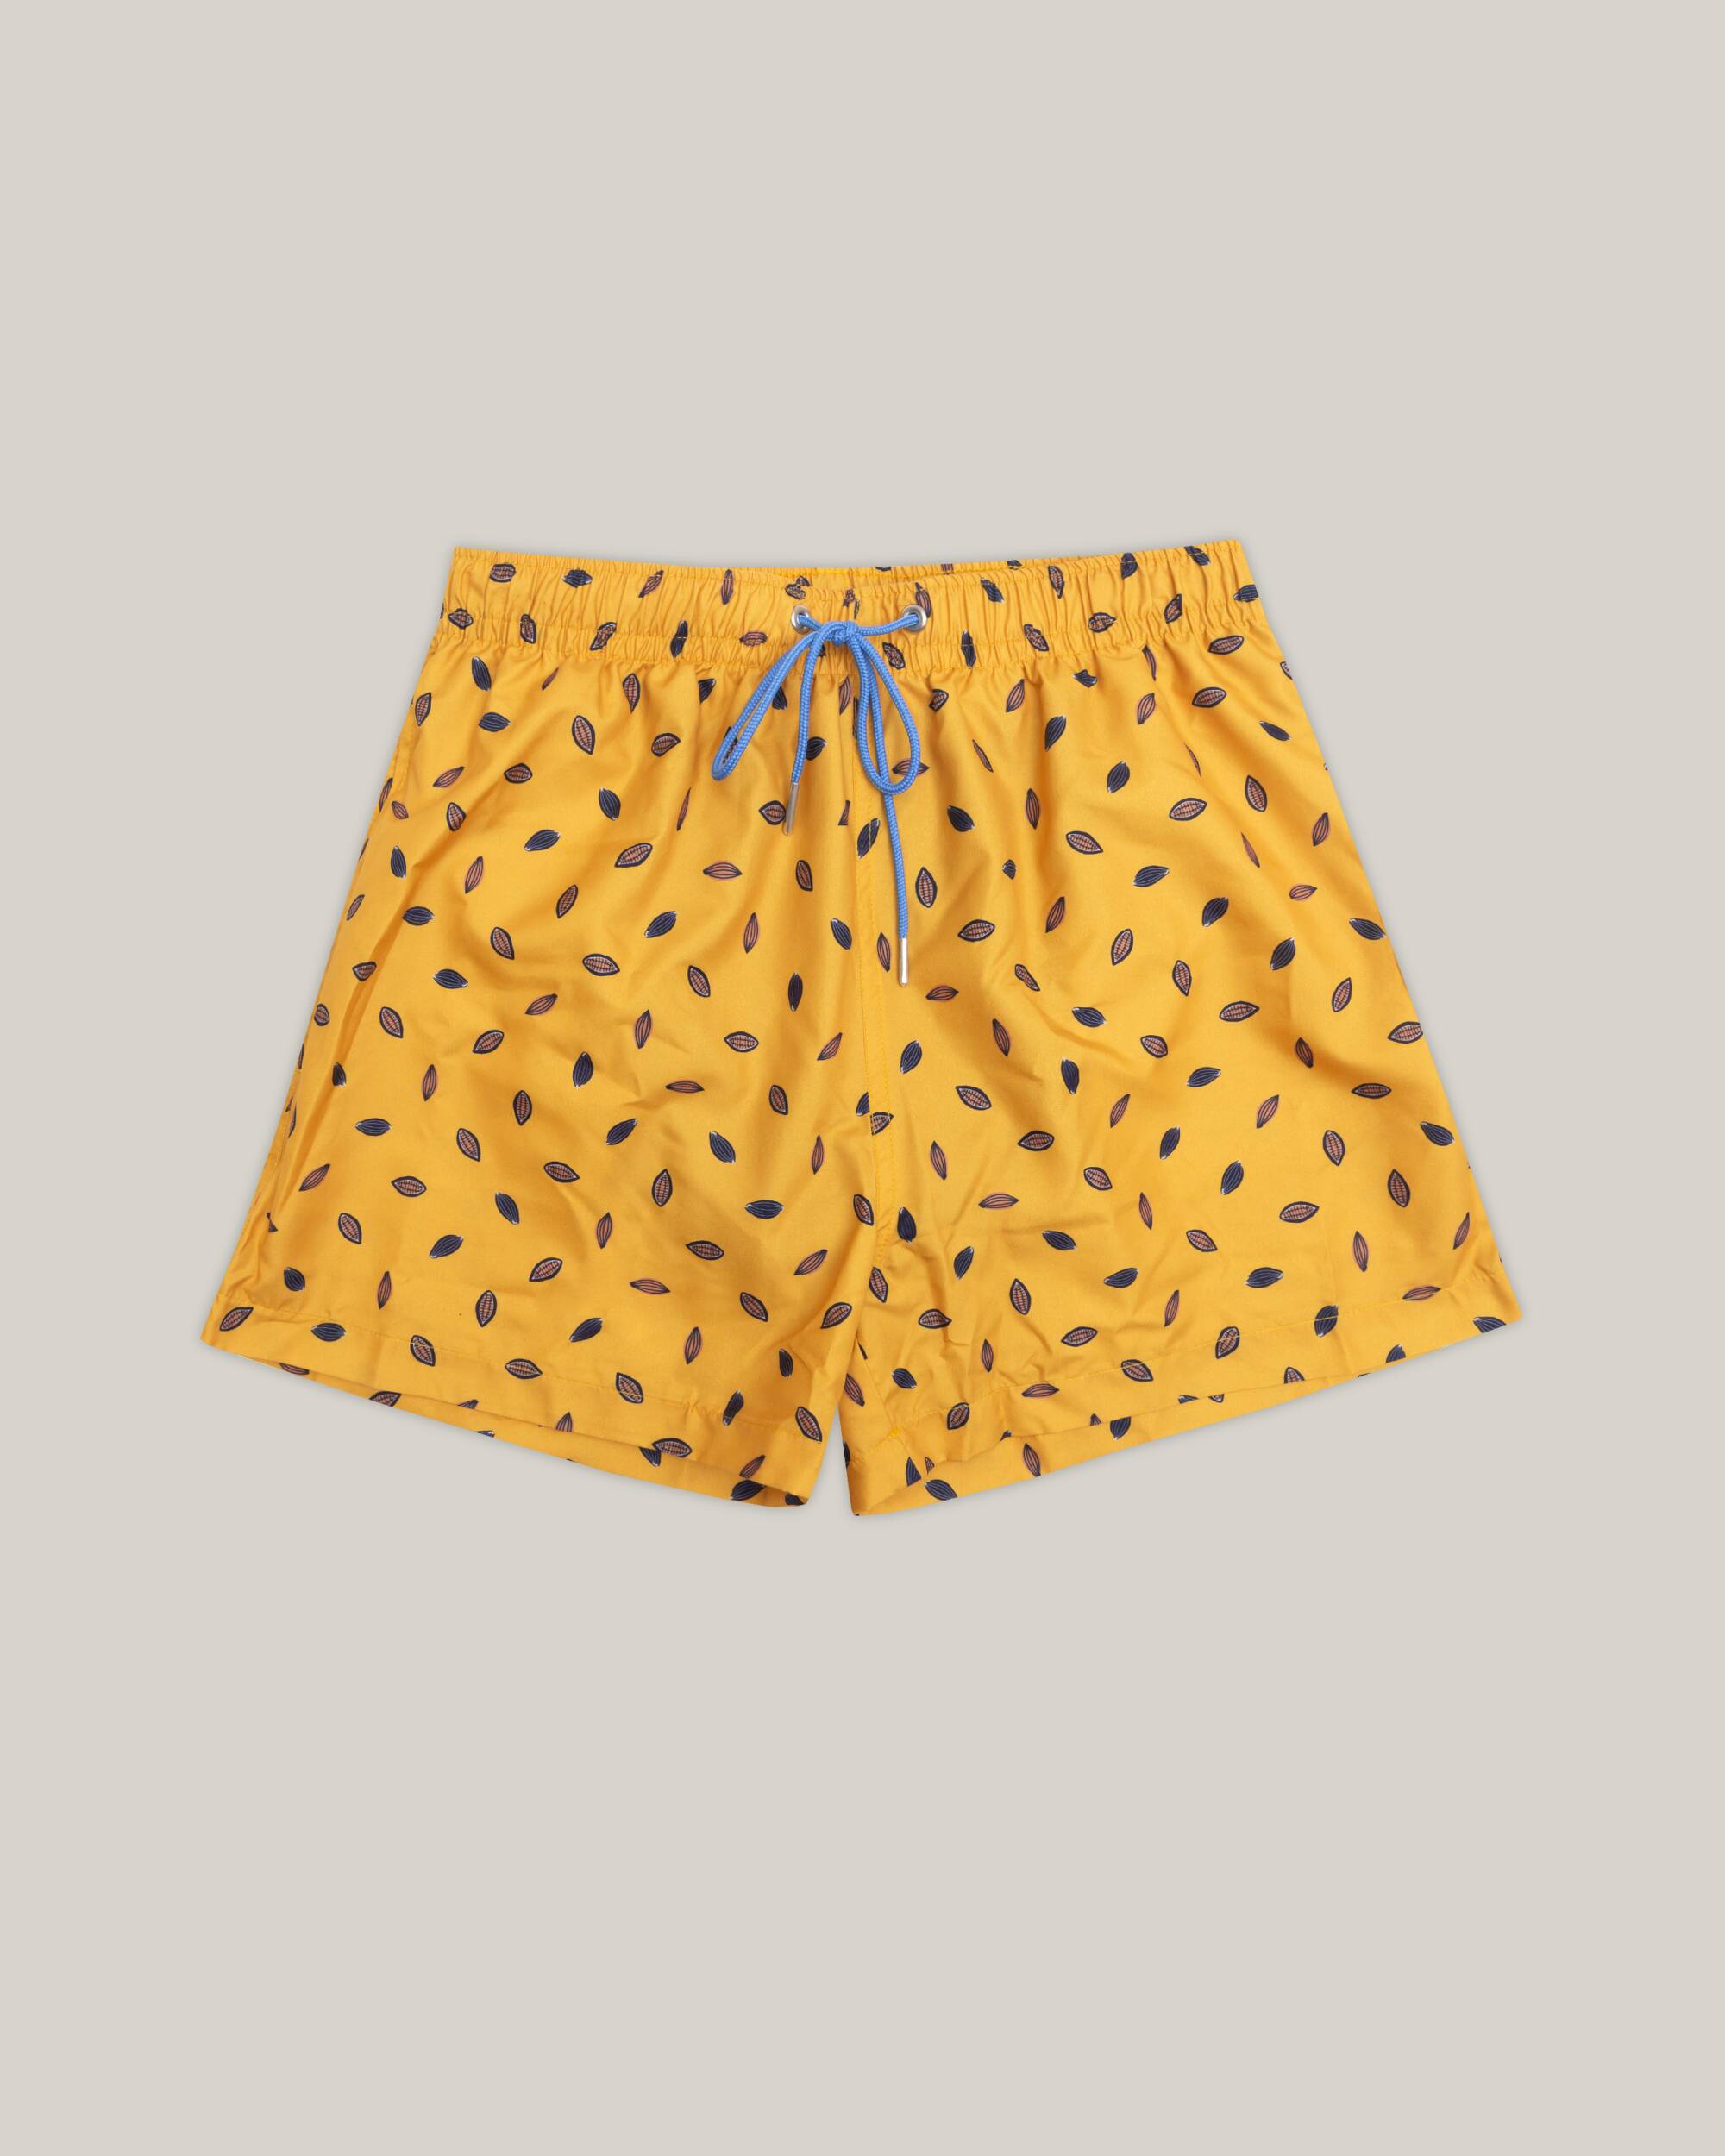 Cocoa swim shorts made from 100% recycled polyester from Brava Fabrics